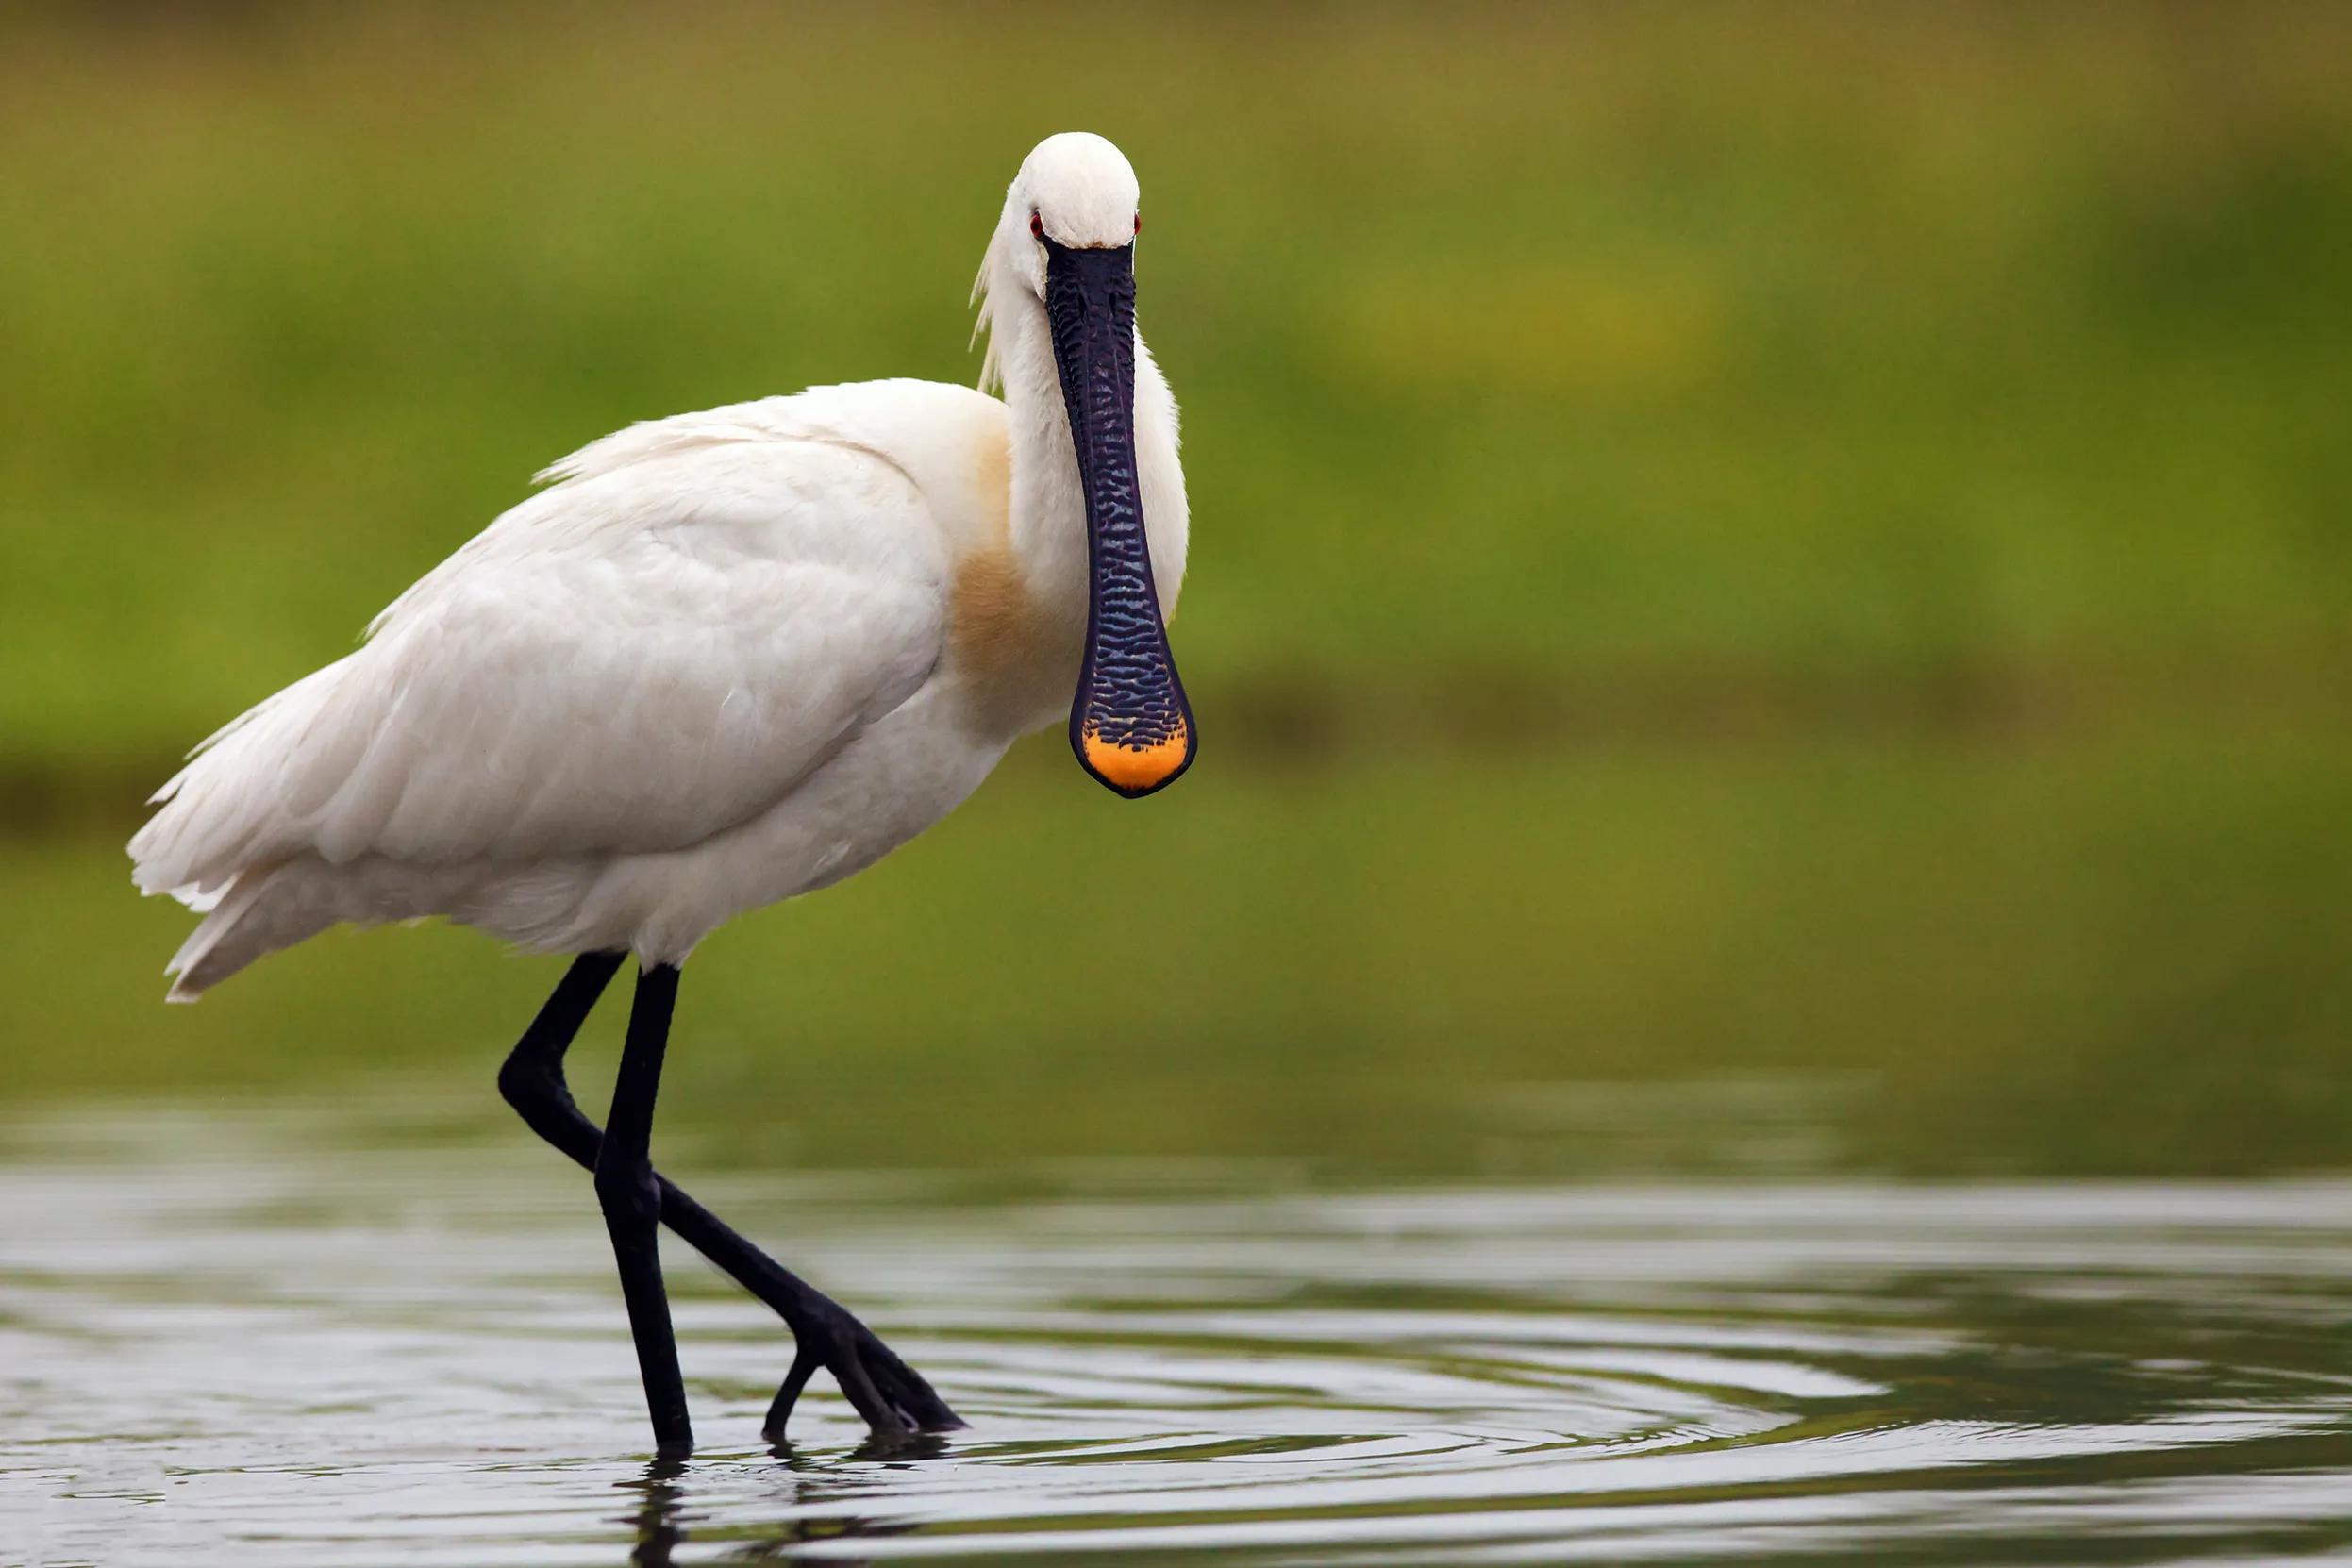 Spoonbill wading through shallow water, looking into the camera 